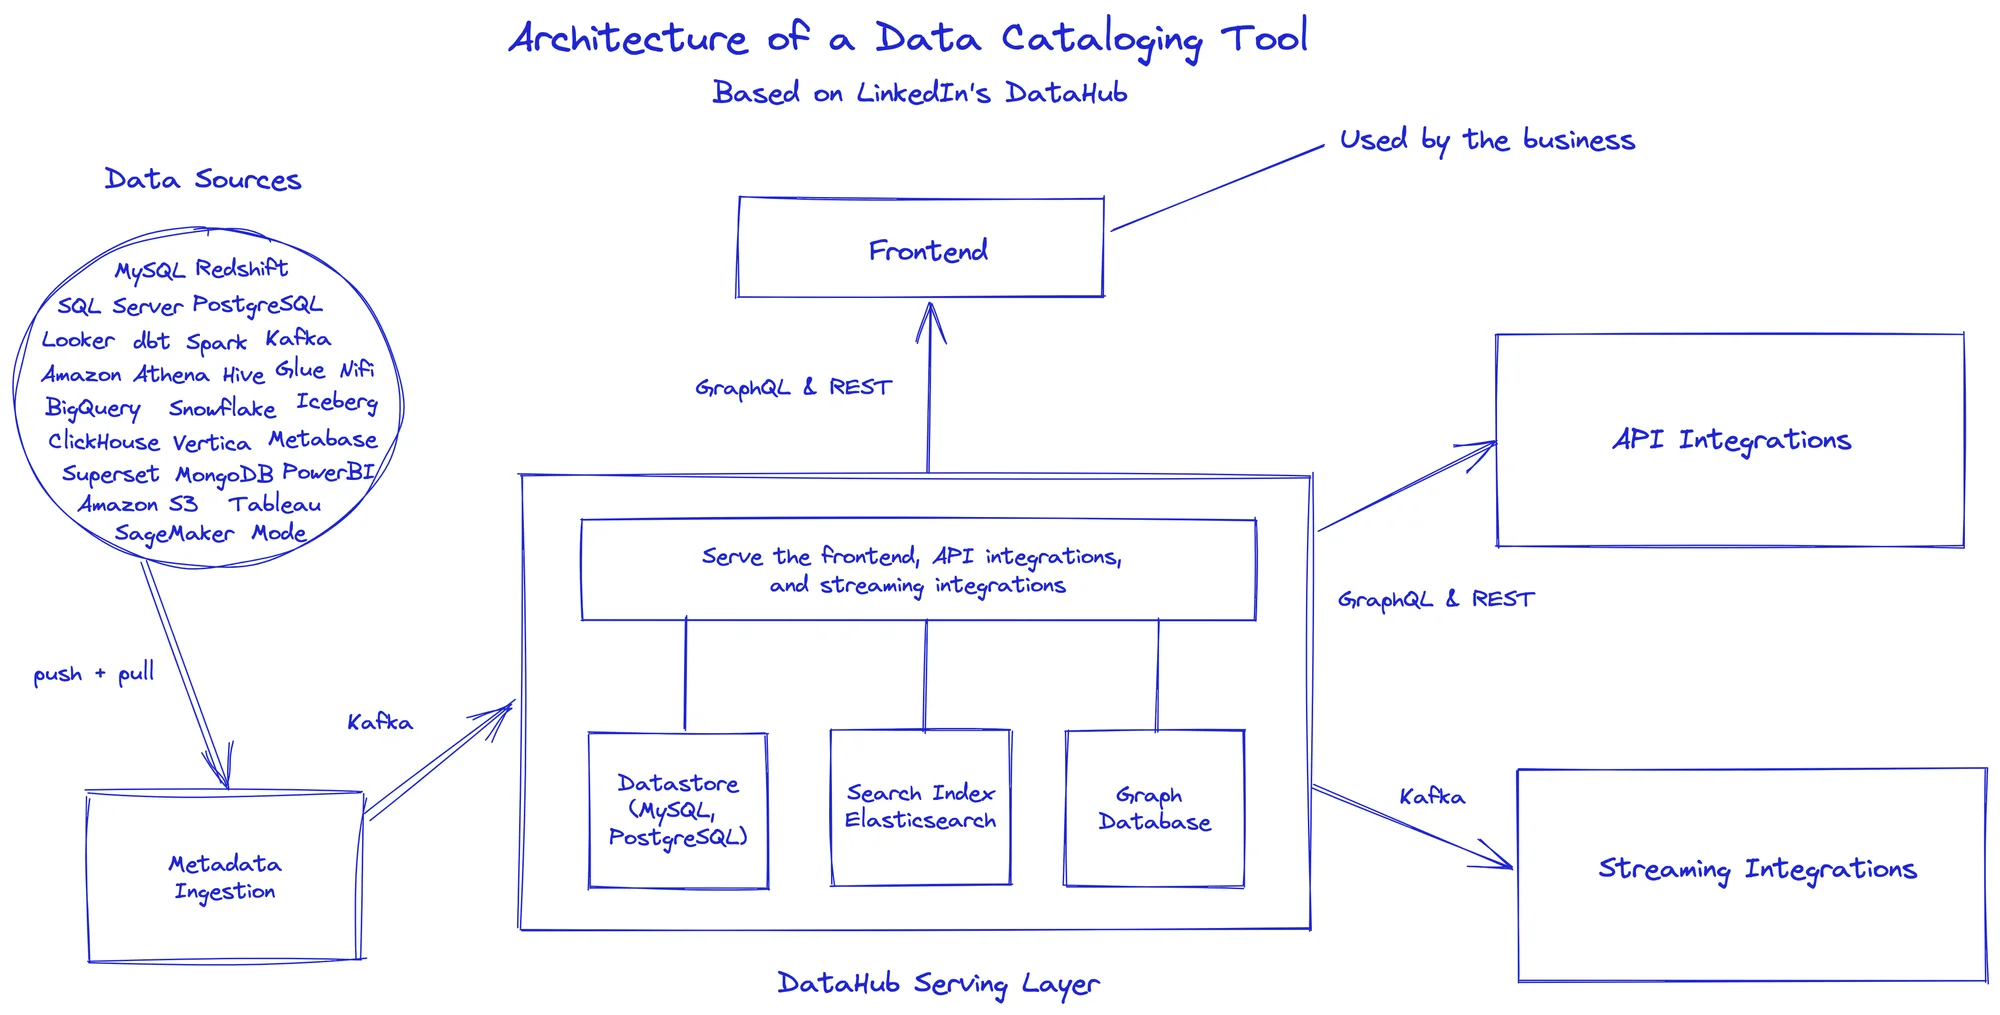 Designing the architecture of a data catalog